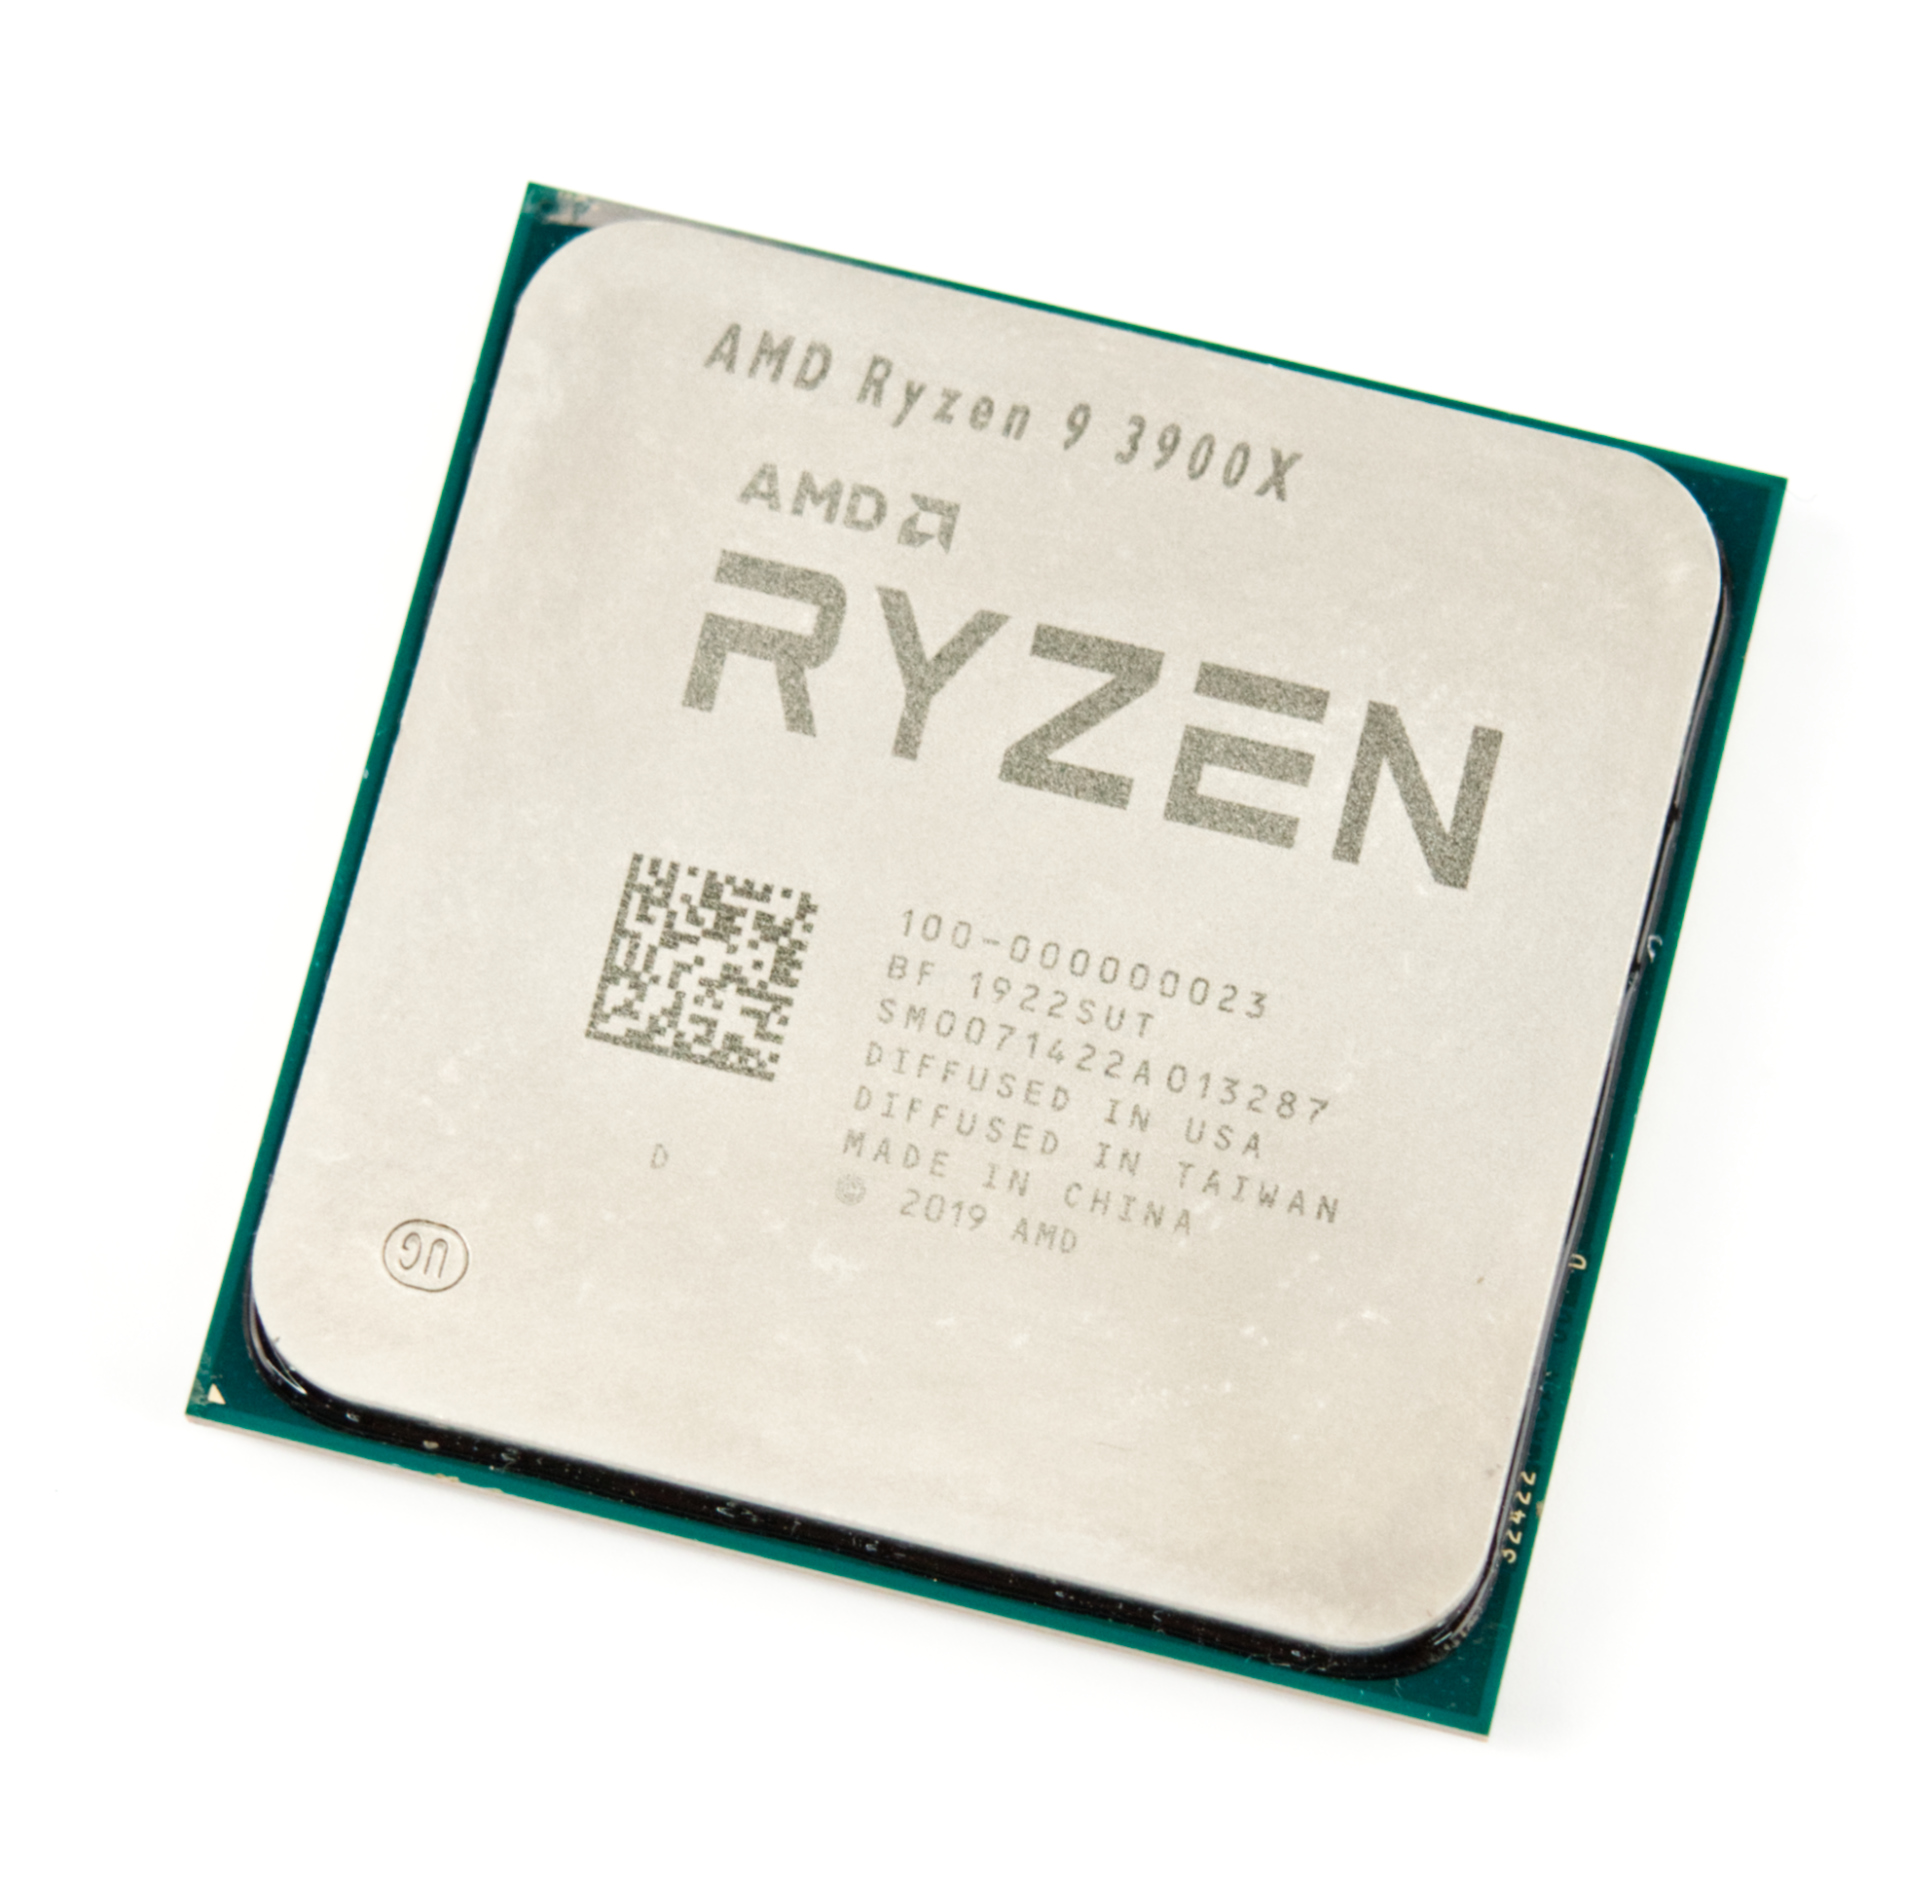 AMD Ryzen 9 3900 Processor - Benchmarks and Specs - NotebookCheck